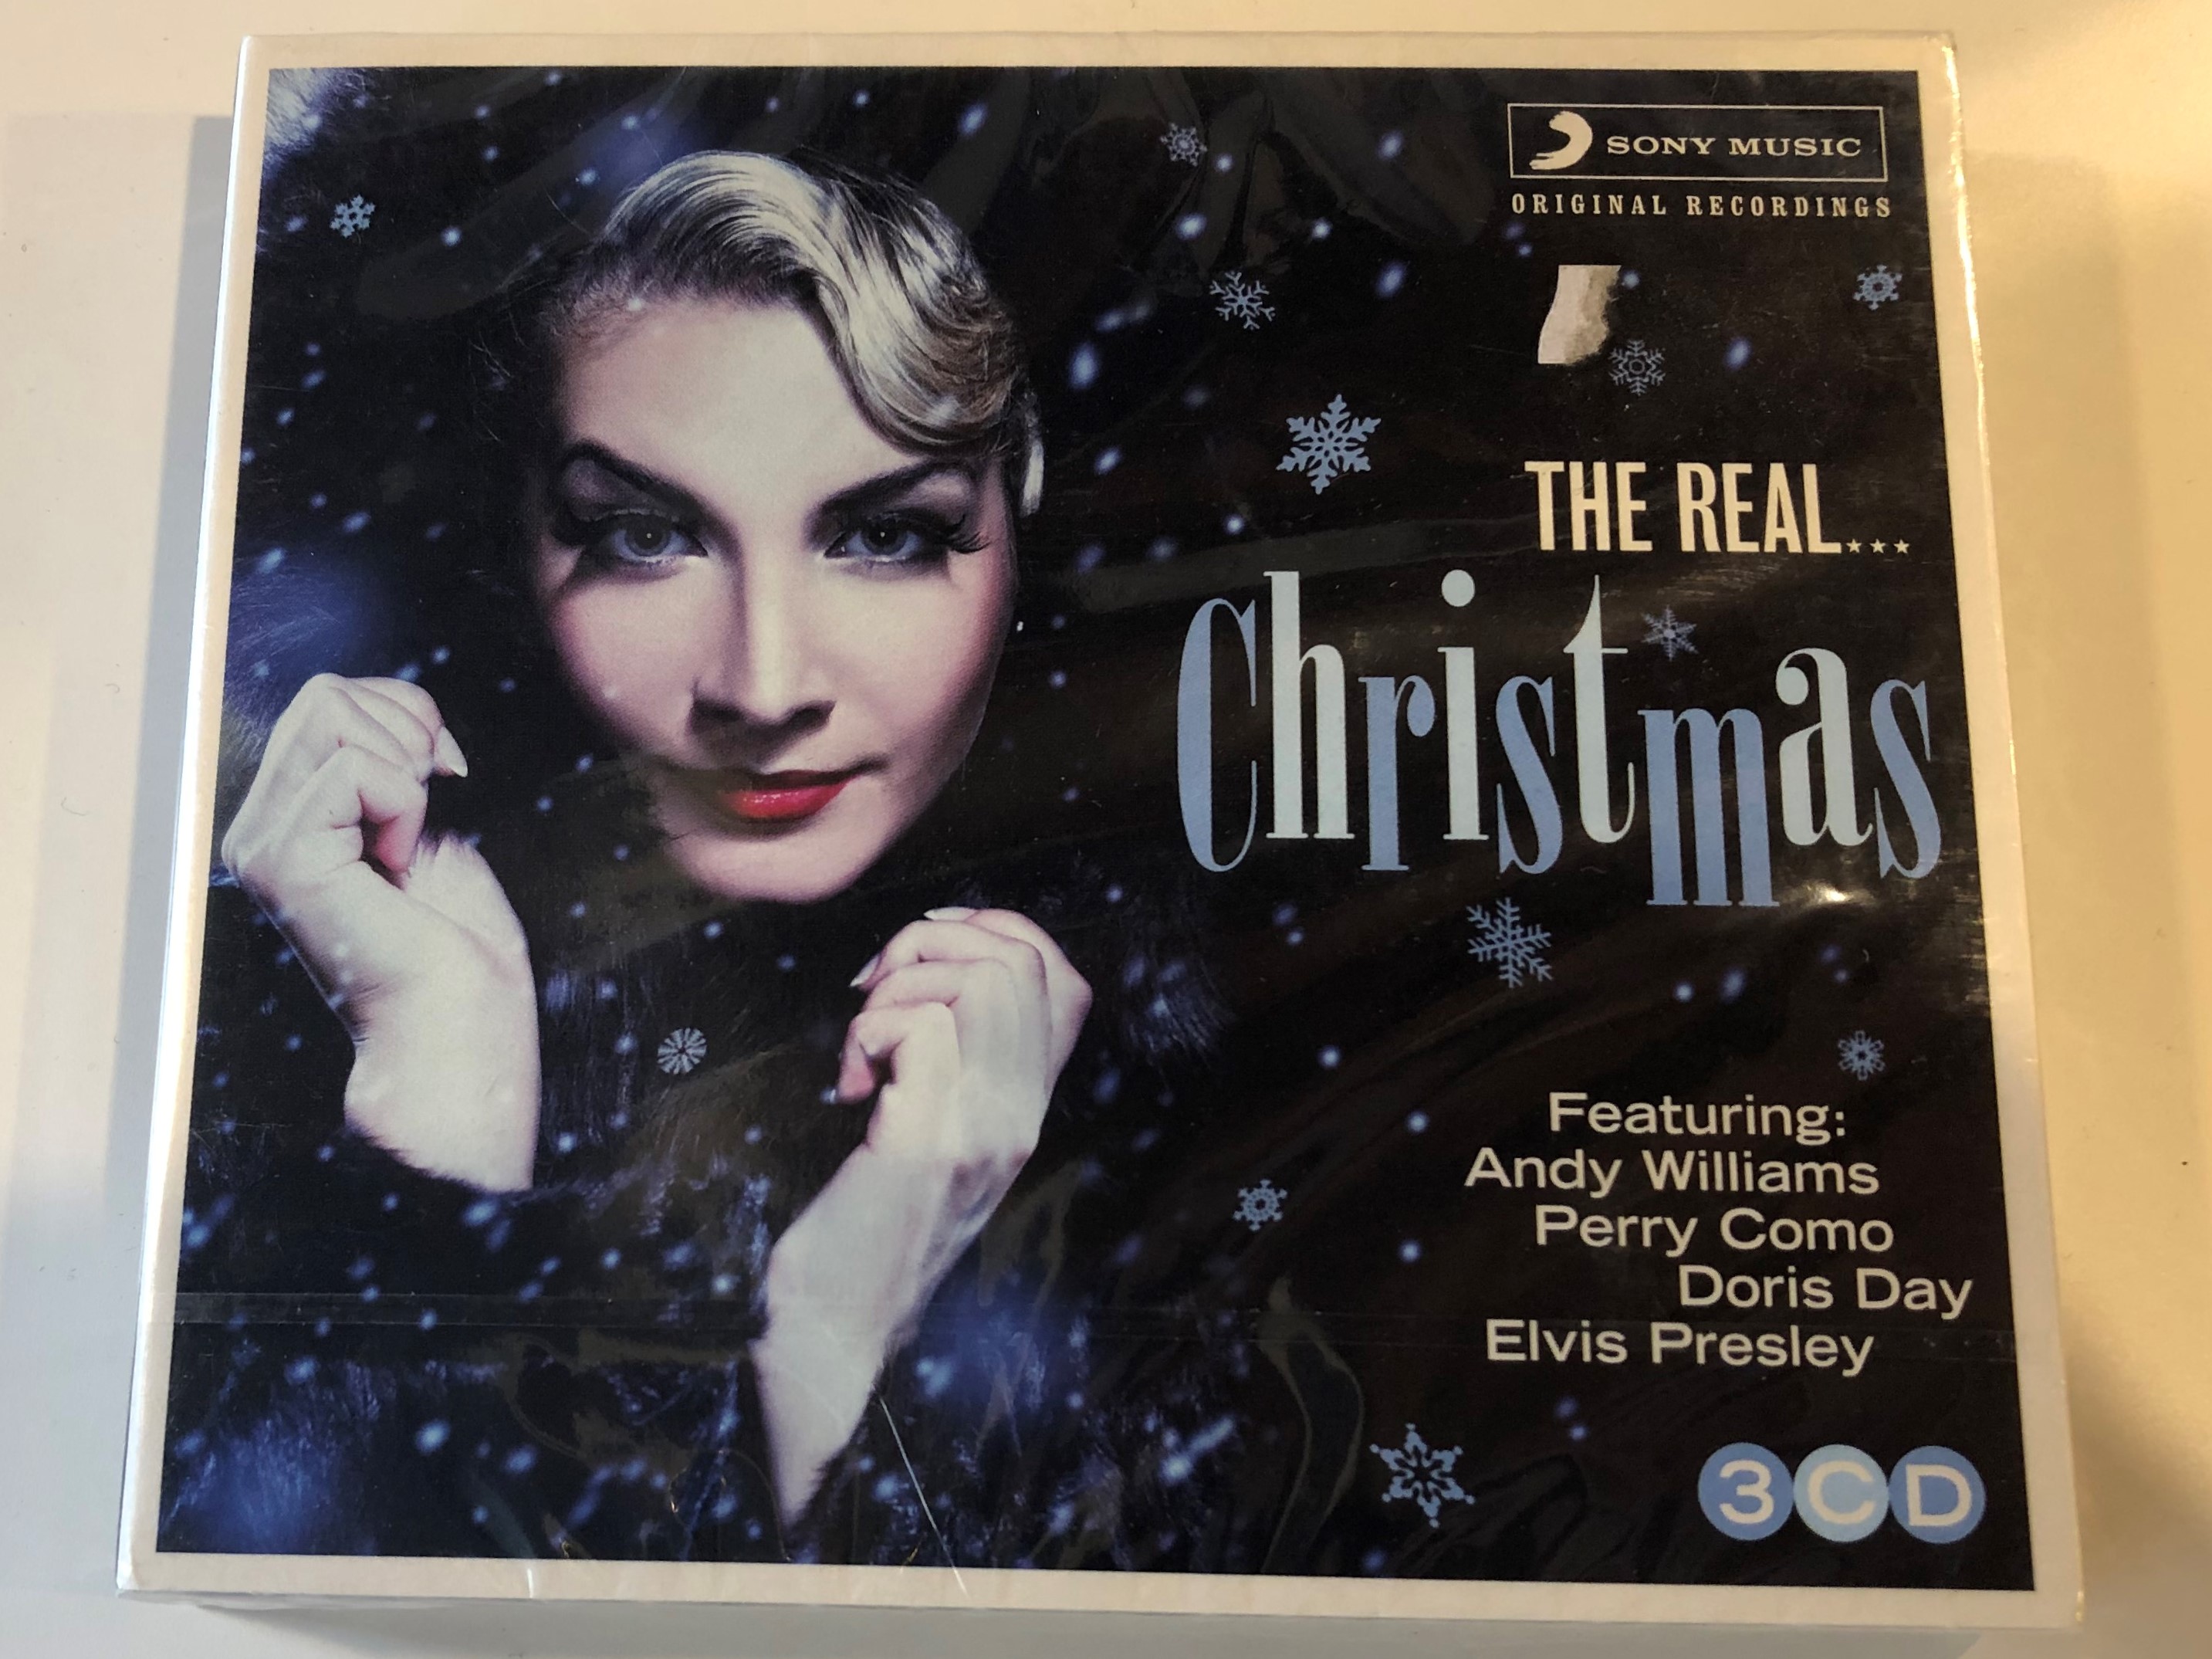 the-real...-christmas-featuring-andy-wiliams-perry-como-doris-day-elvis-prisley-sony-music-3x-audio-cd-2012-88725413482-1-.jpg